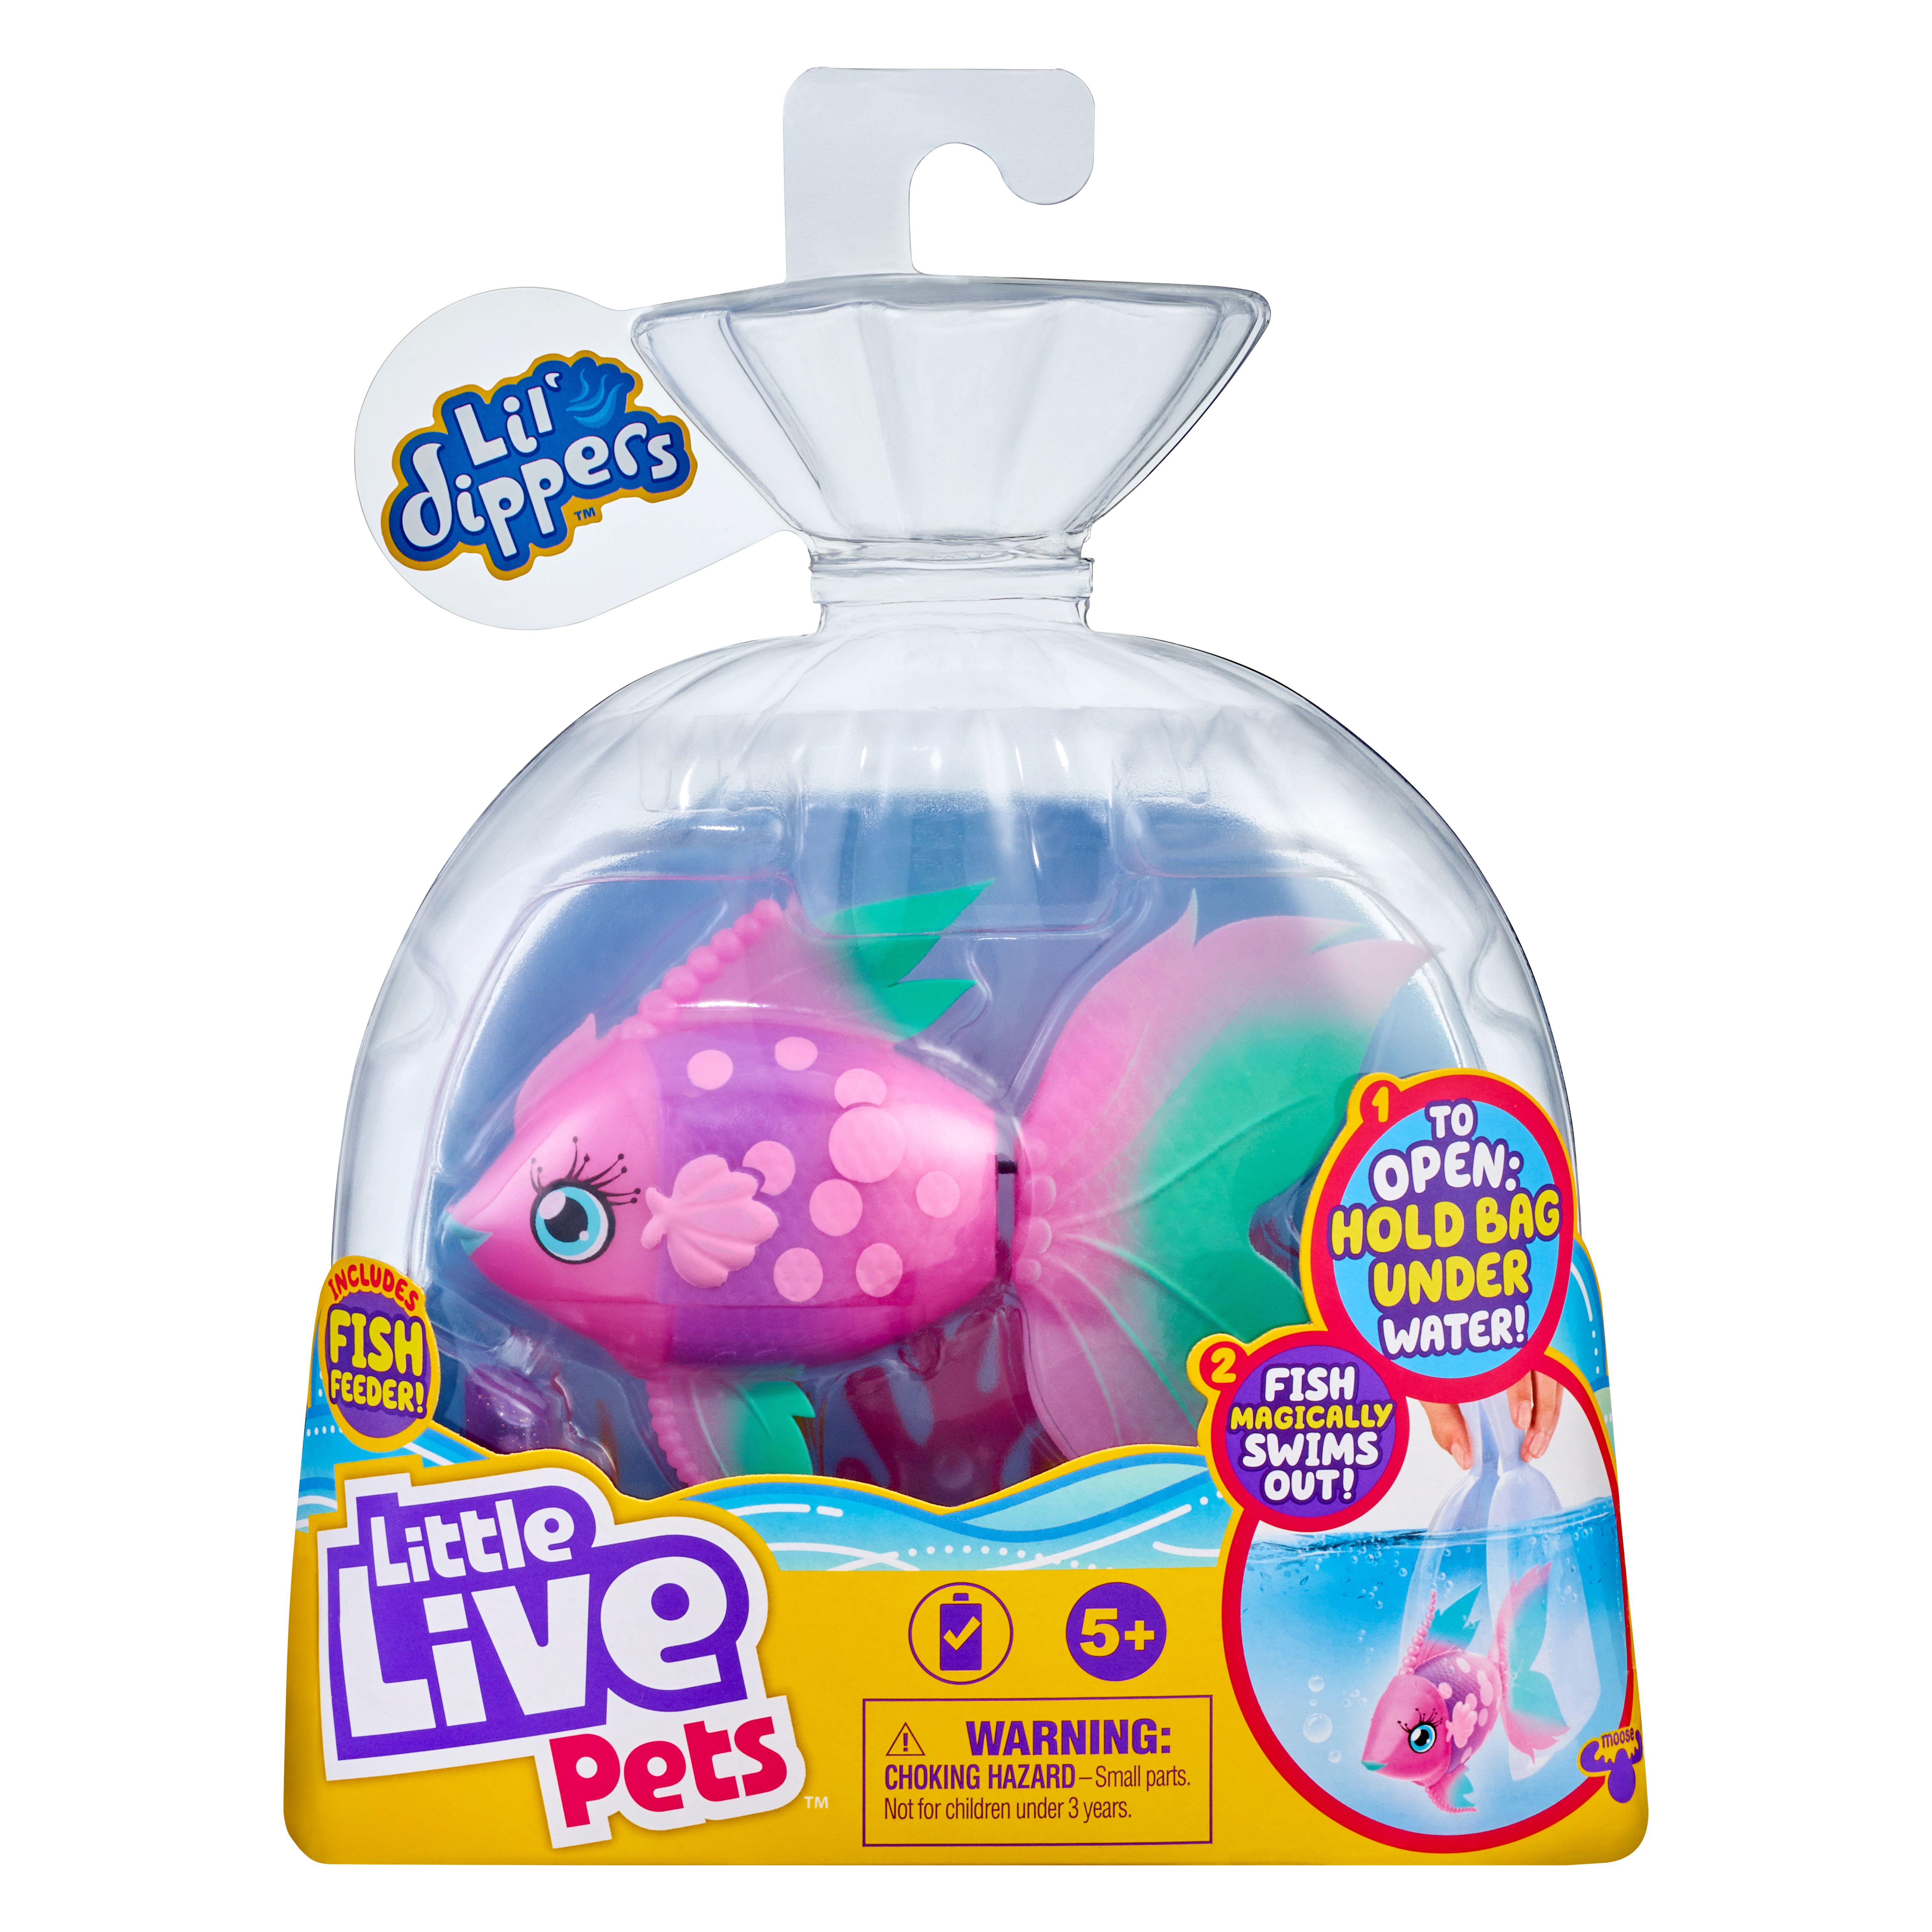 Little Live Pets Lil Dippers Furtail Fish & Feeder 2019 Moose for sale online 